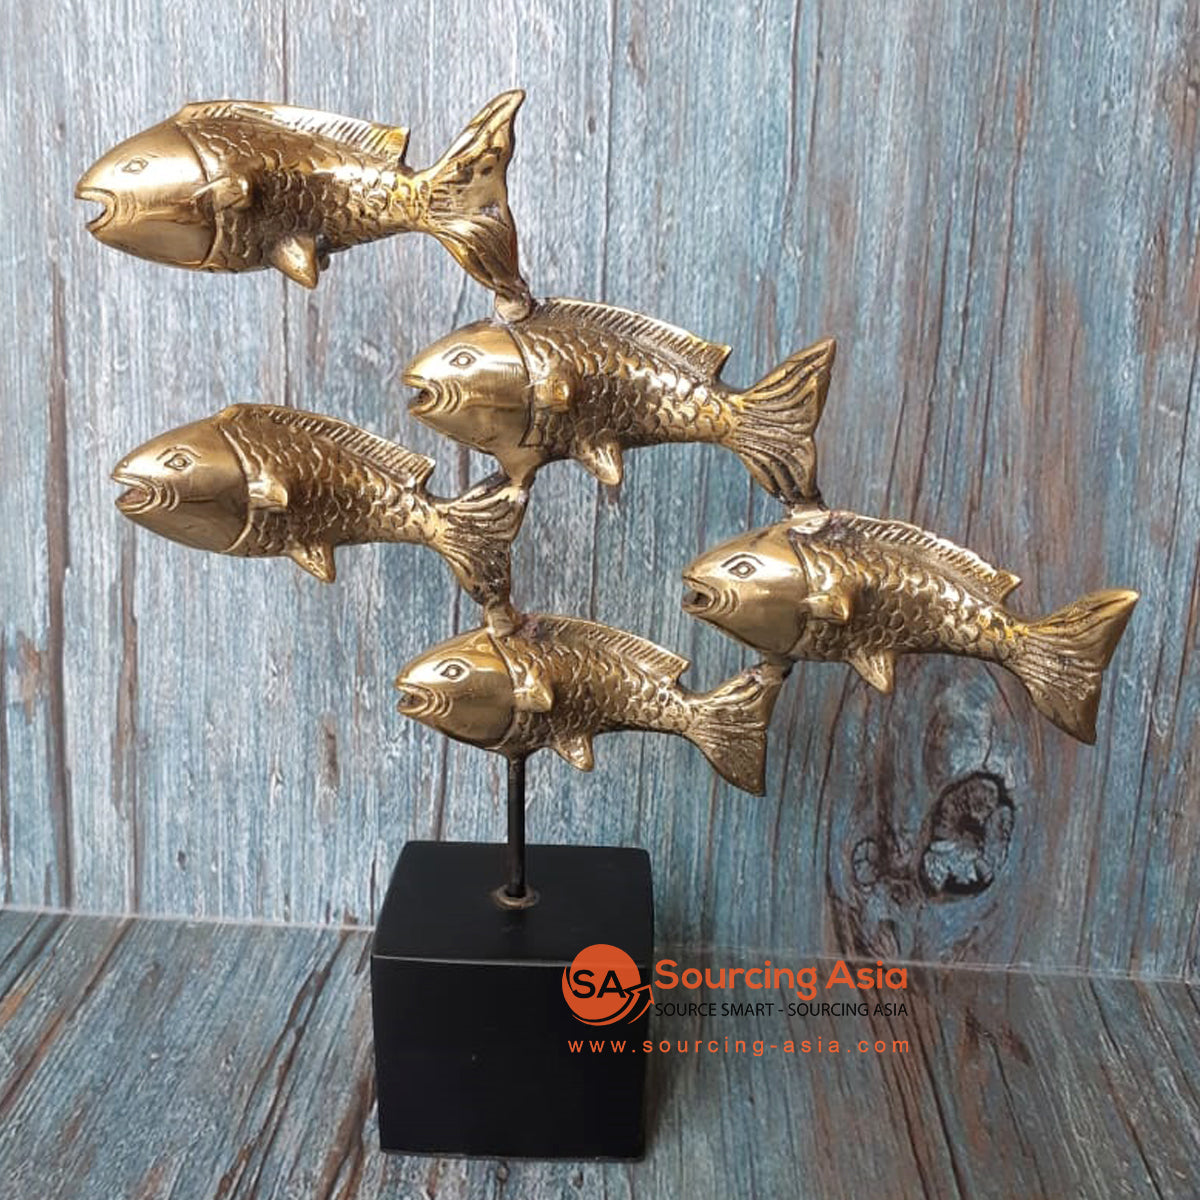 GB133 FIVE BRASS FISHES ON STAND DECORATION